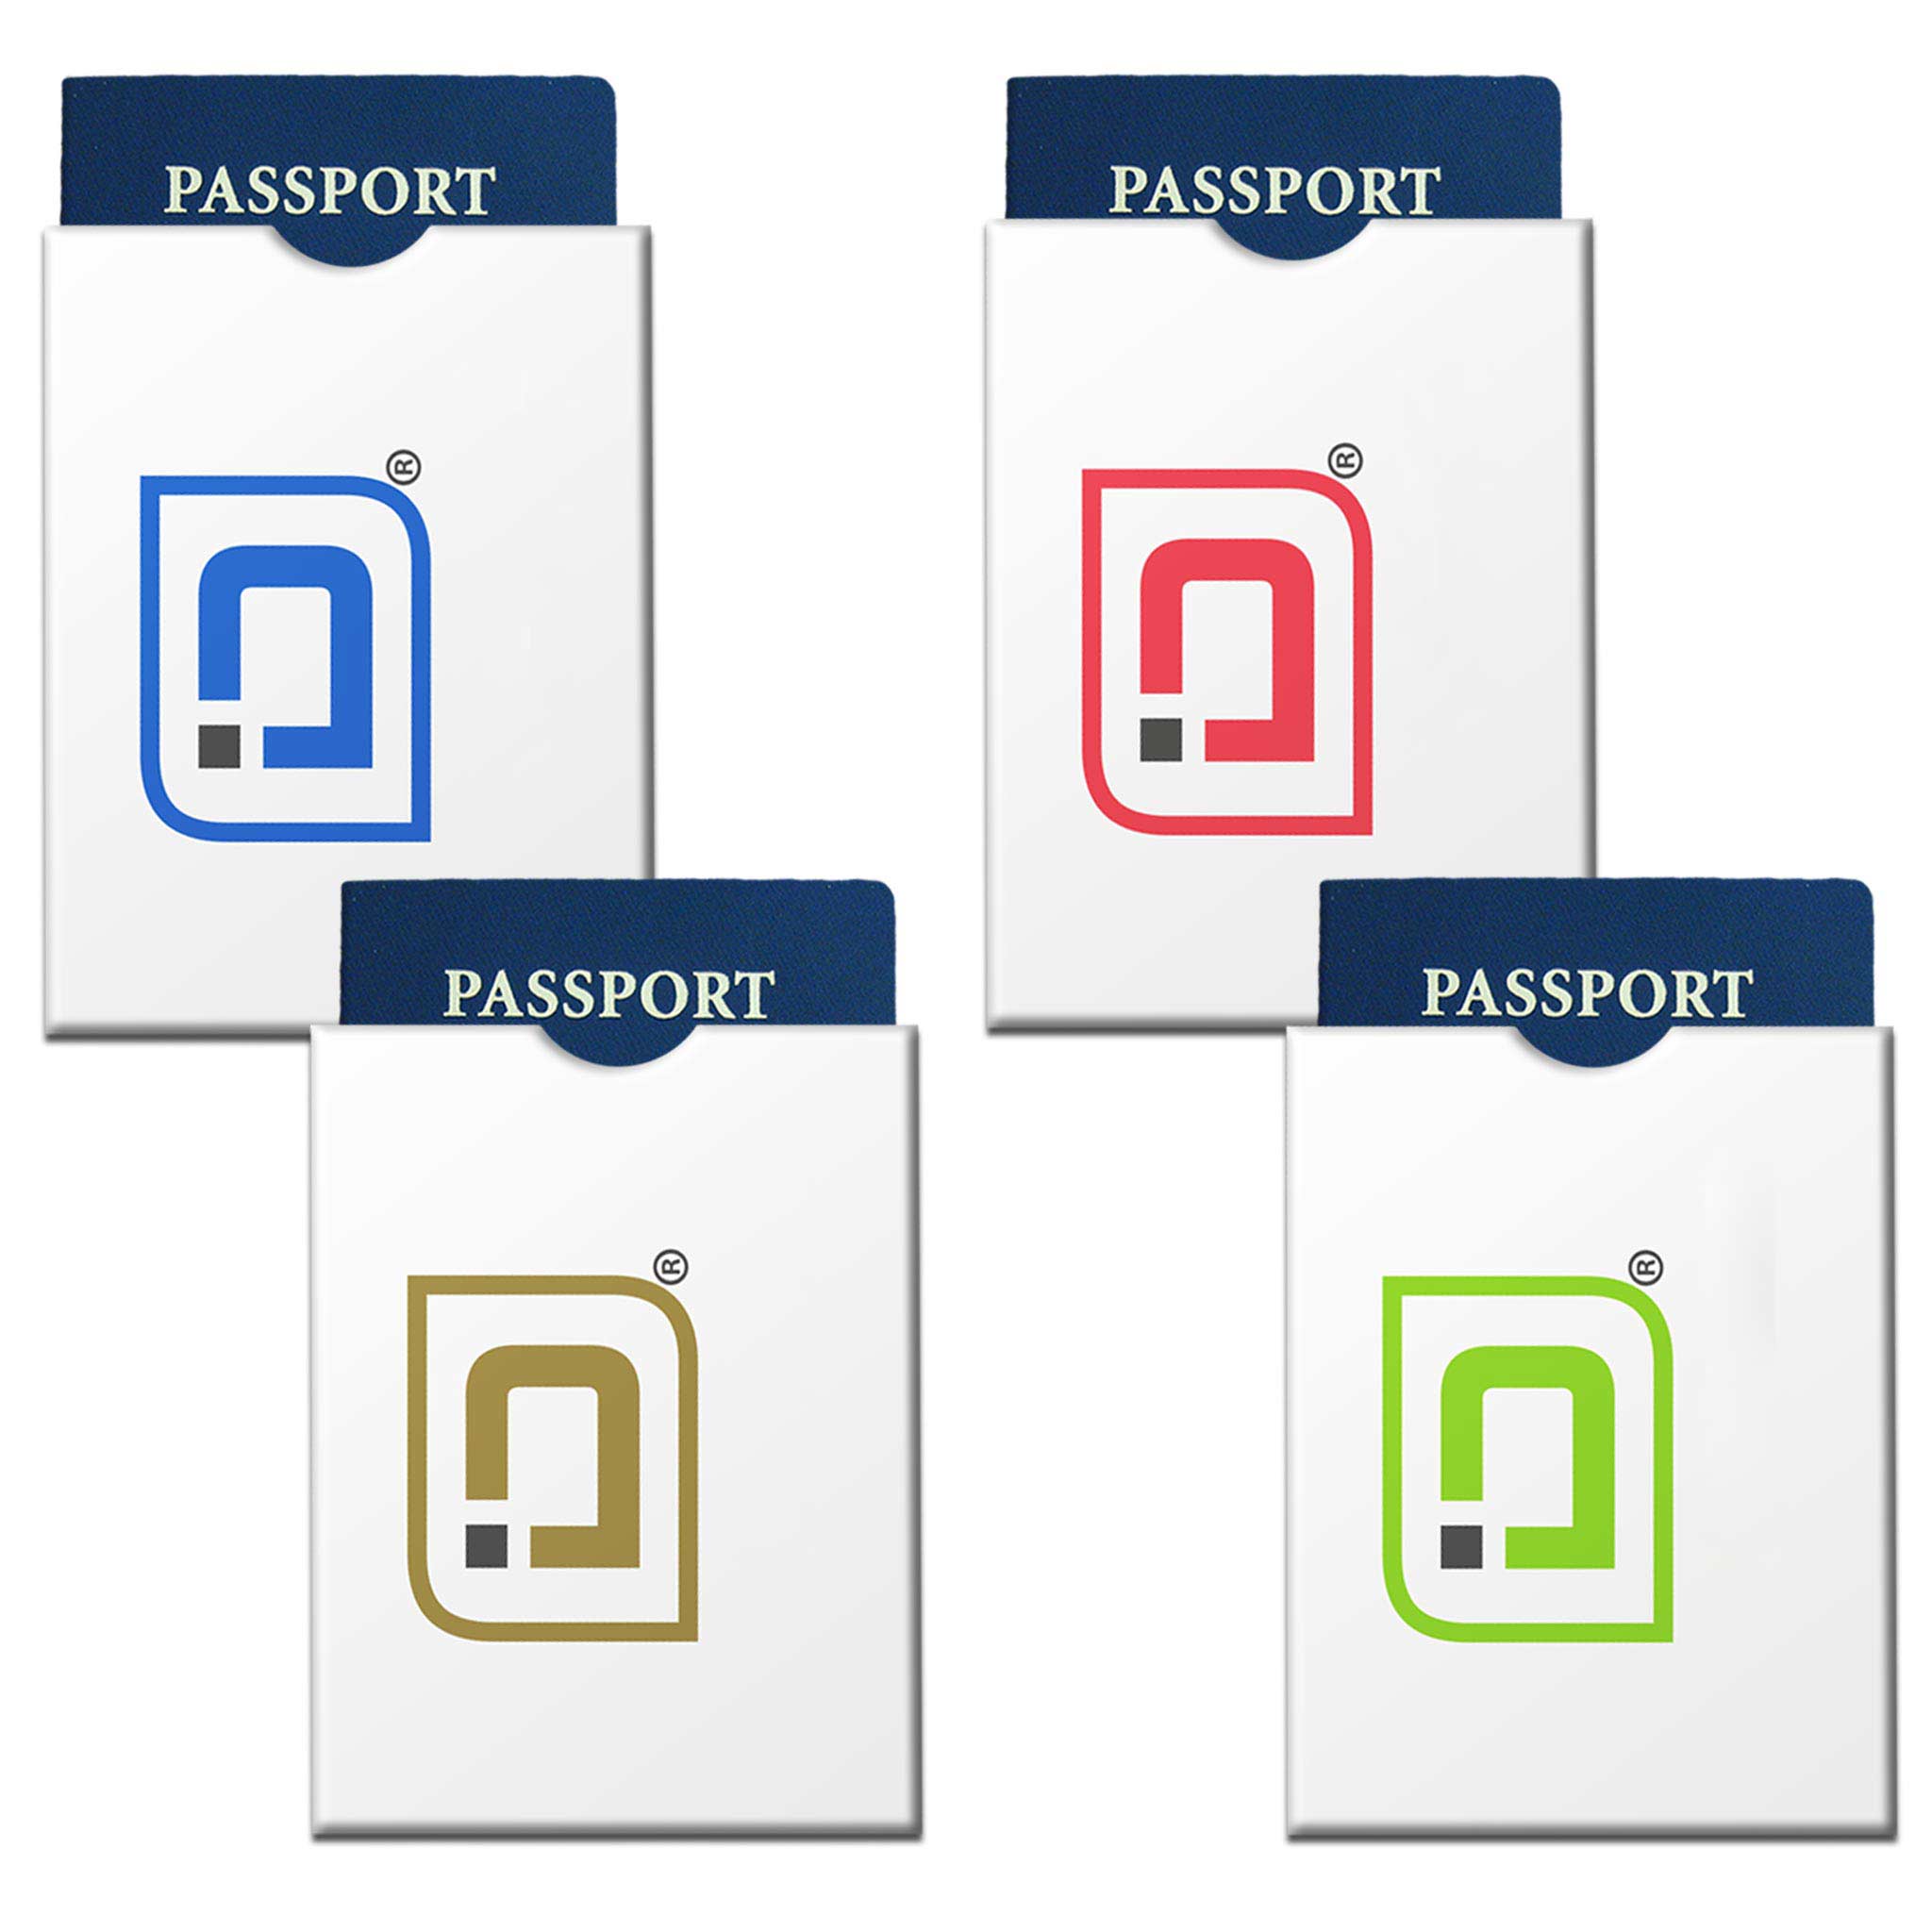 Gold Credit Card and Passport Sleeve Covers - 20 Pack